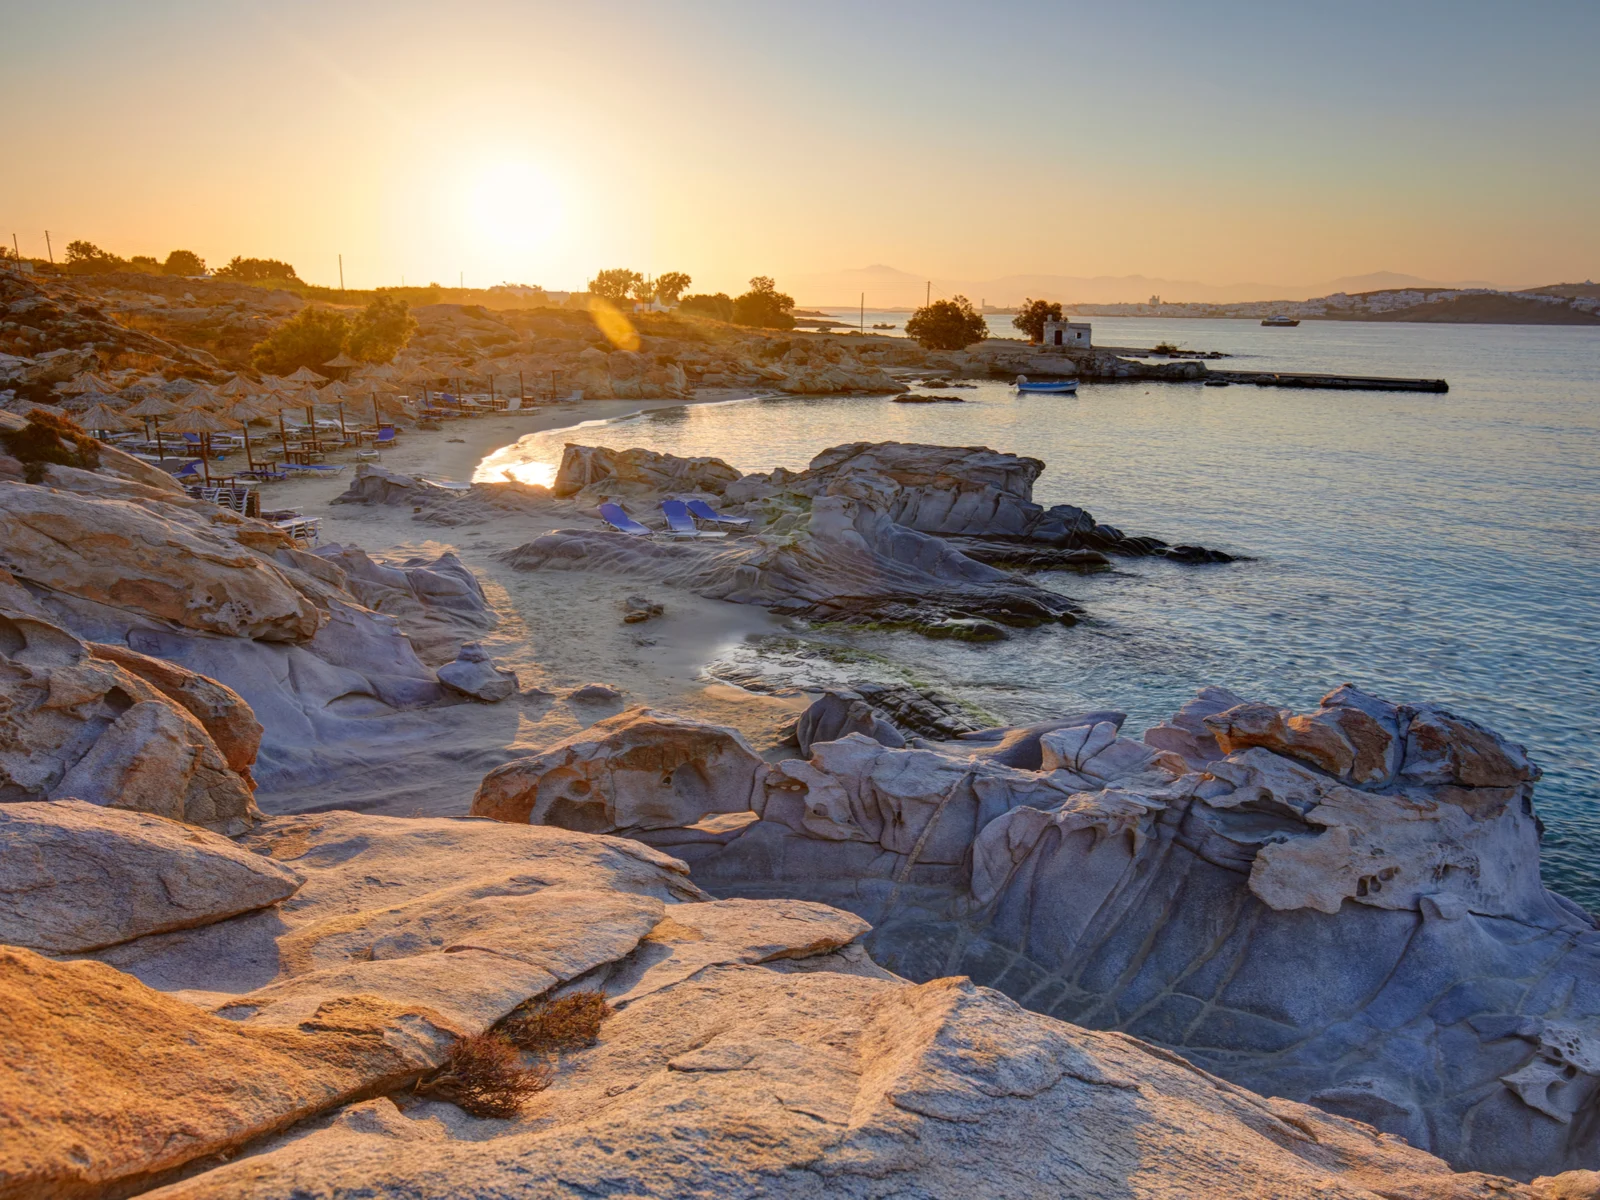 Sunrise over Kolymbithres, Paros, one of our picks for the best beaches in Greece